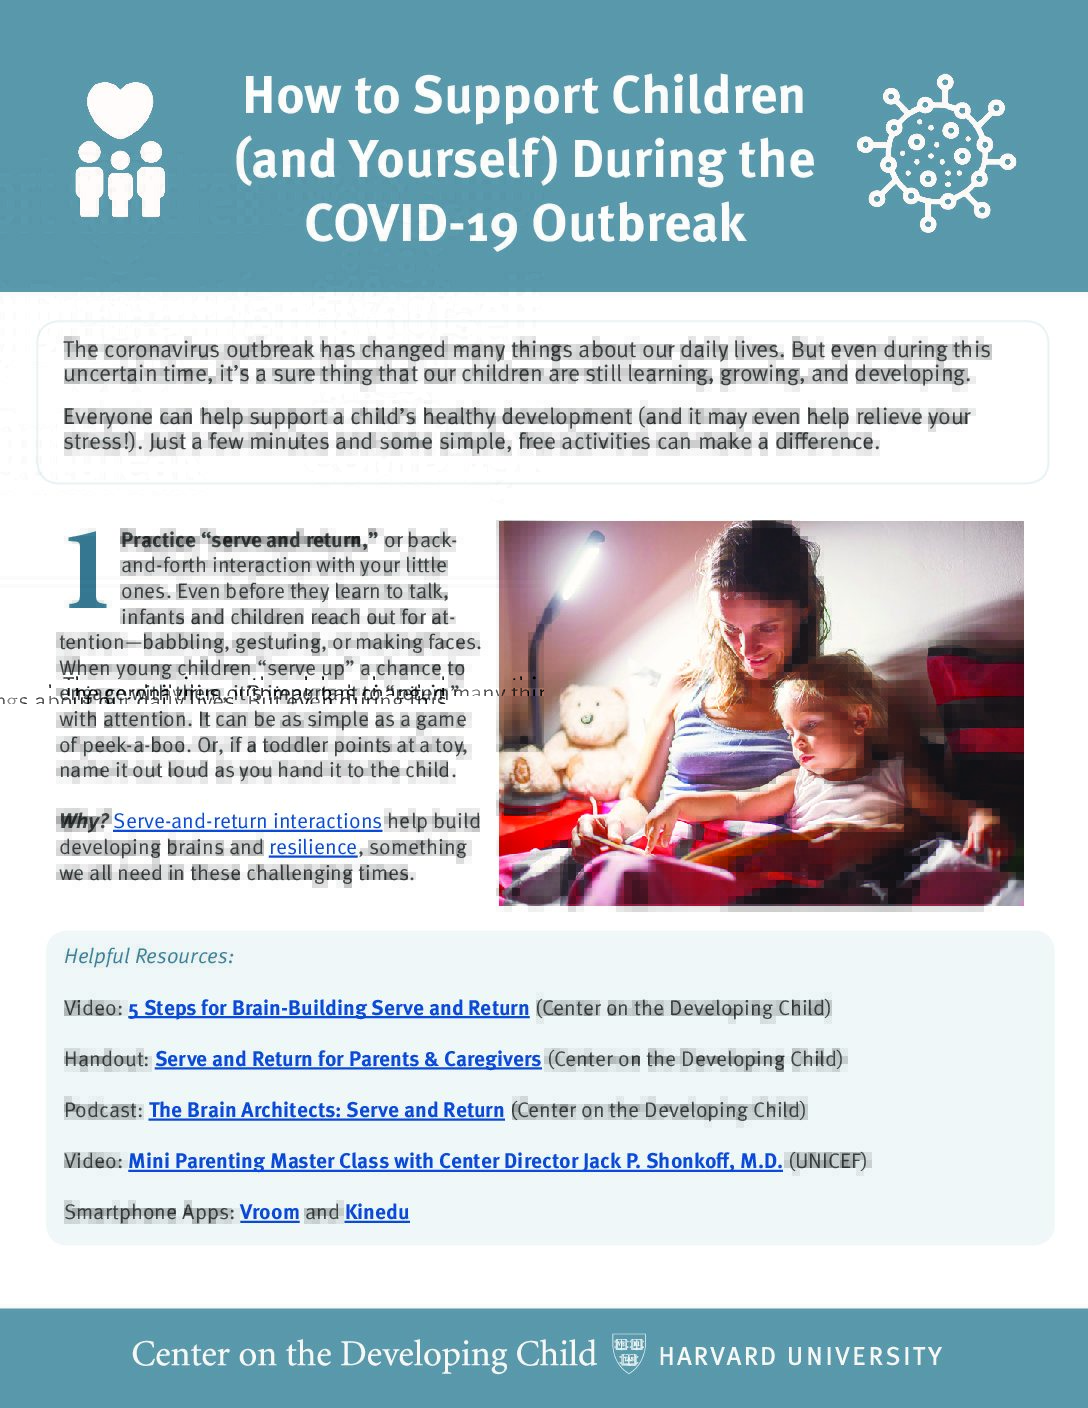 Supporting Children (and Yourself) During the COVID-19 Outbreak